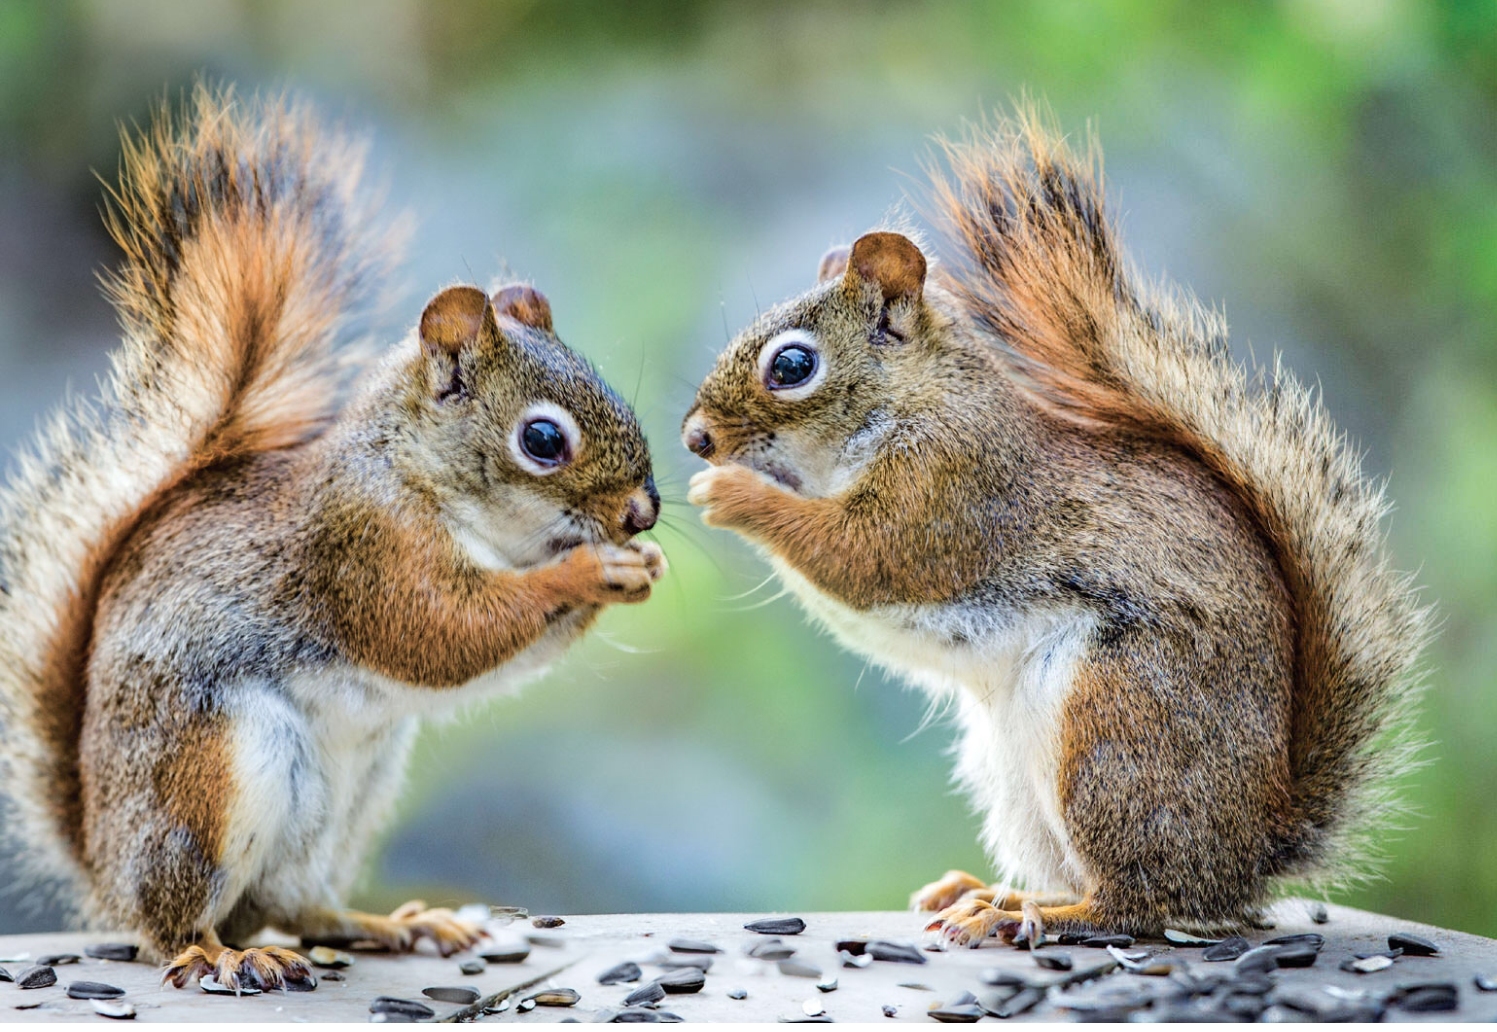 the secret life of squirrels by nancy rose